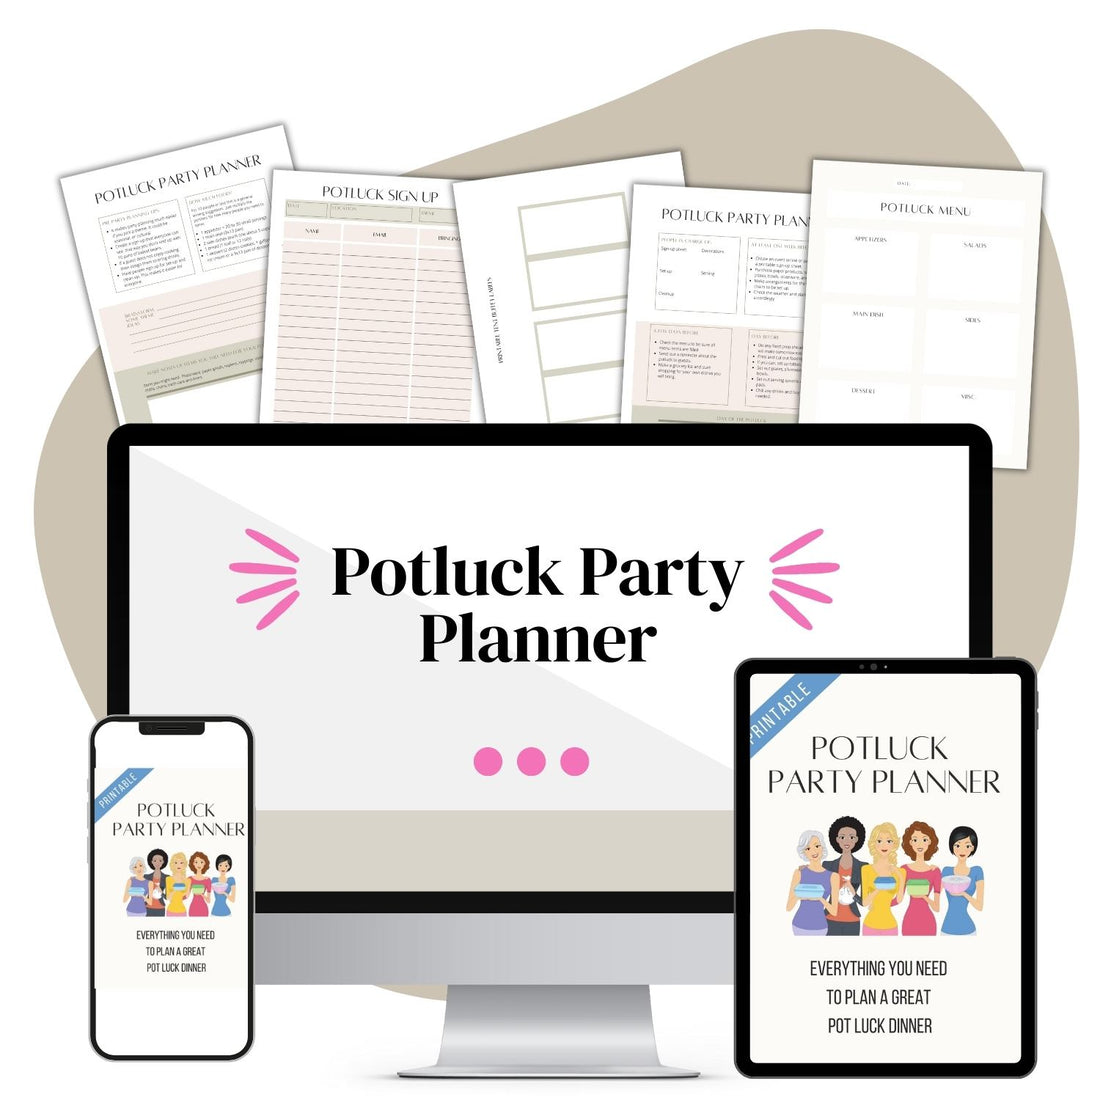 Potluck Party Planner